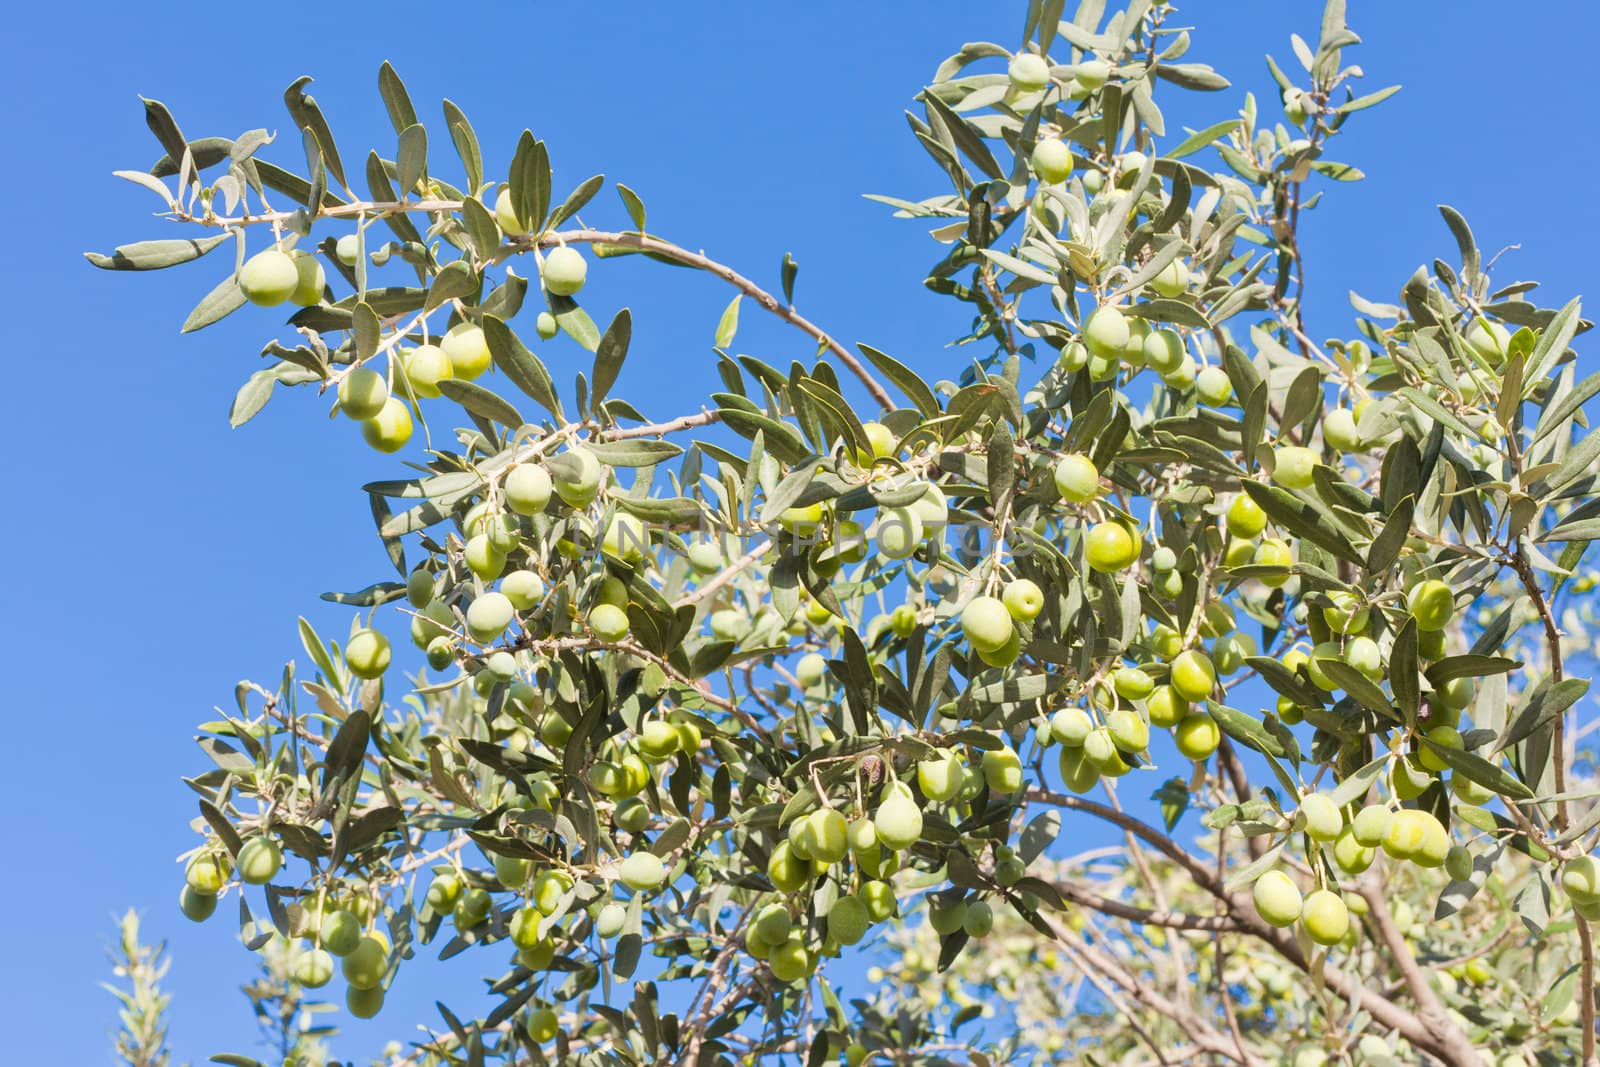 Foliage of Olive tree (Olea Europaea) loaded with ripe green olives ready to be harvested against blue mediterranean sky.